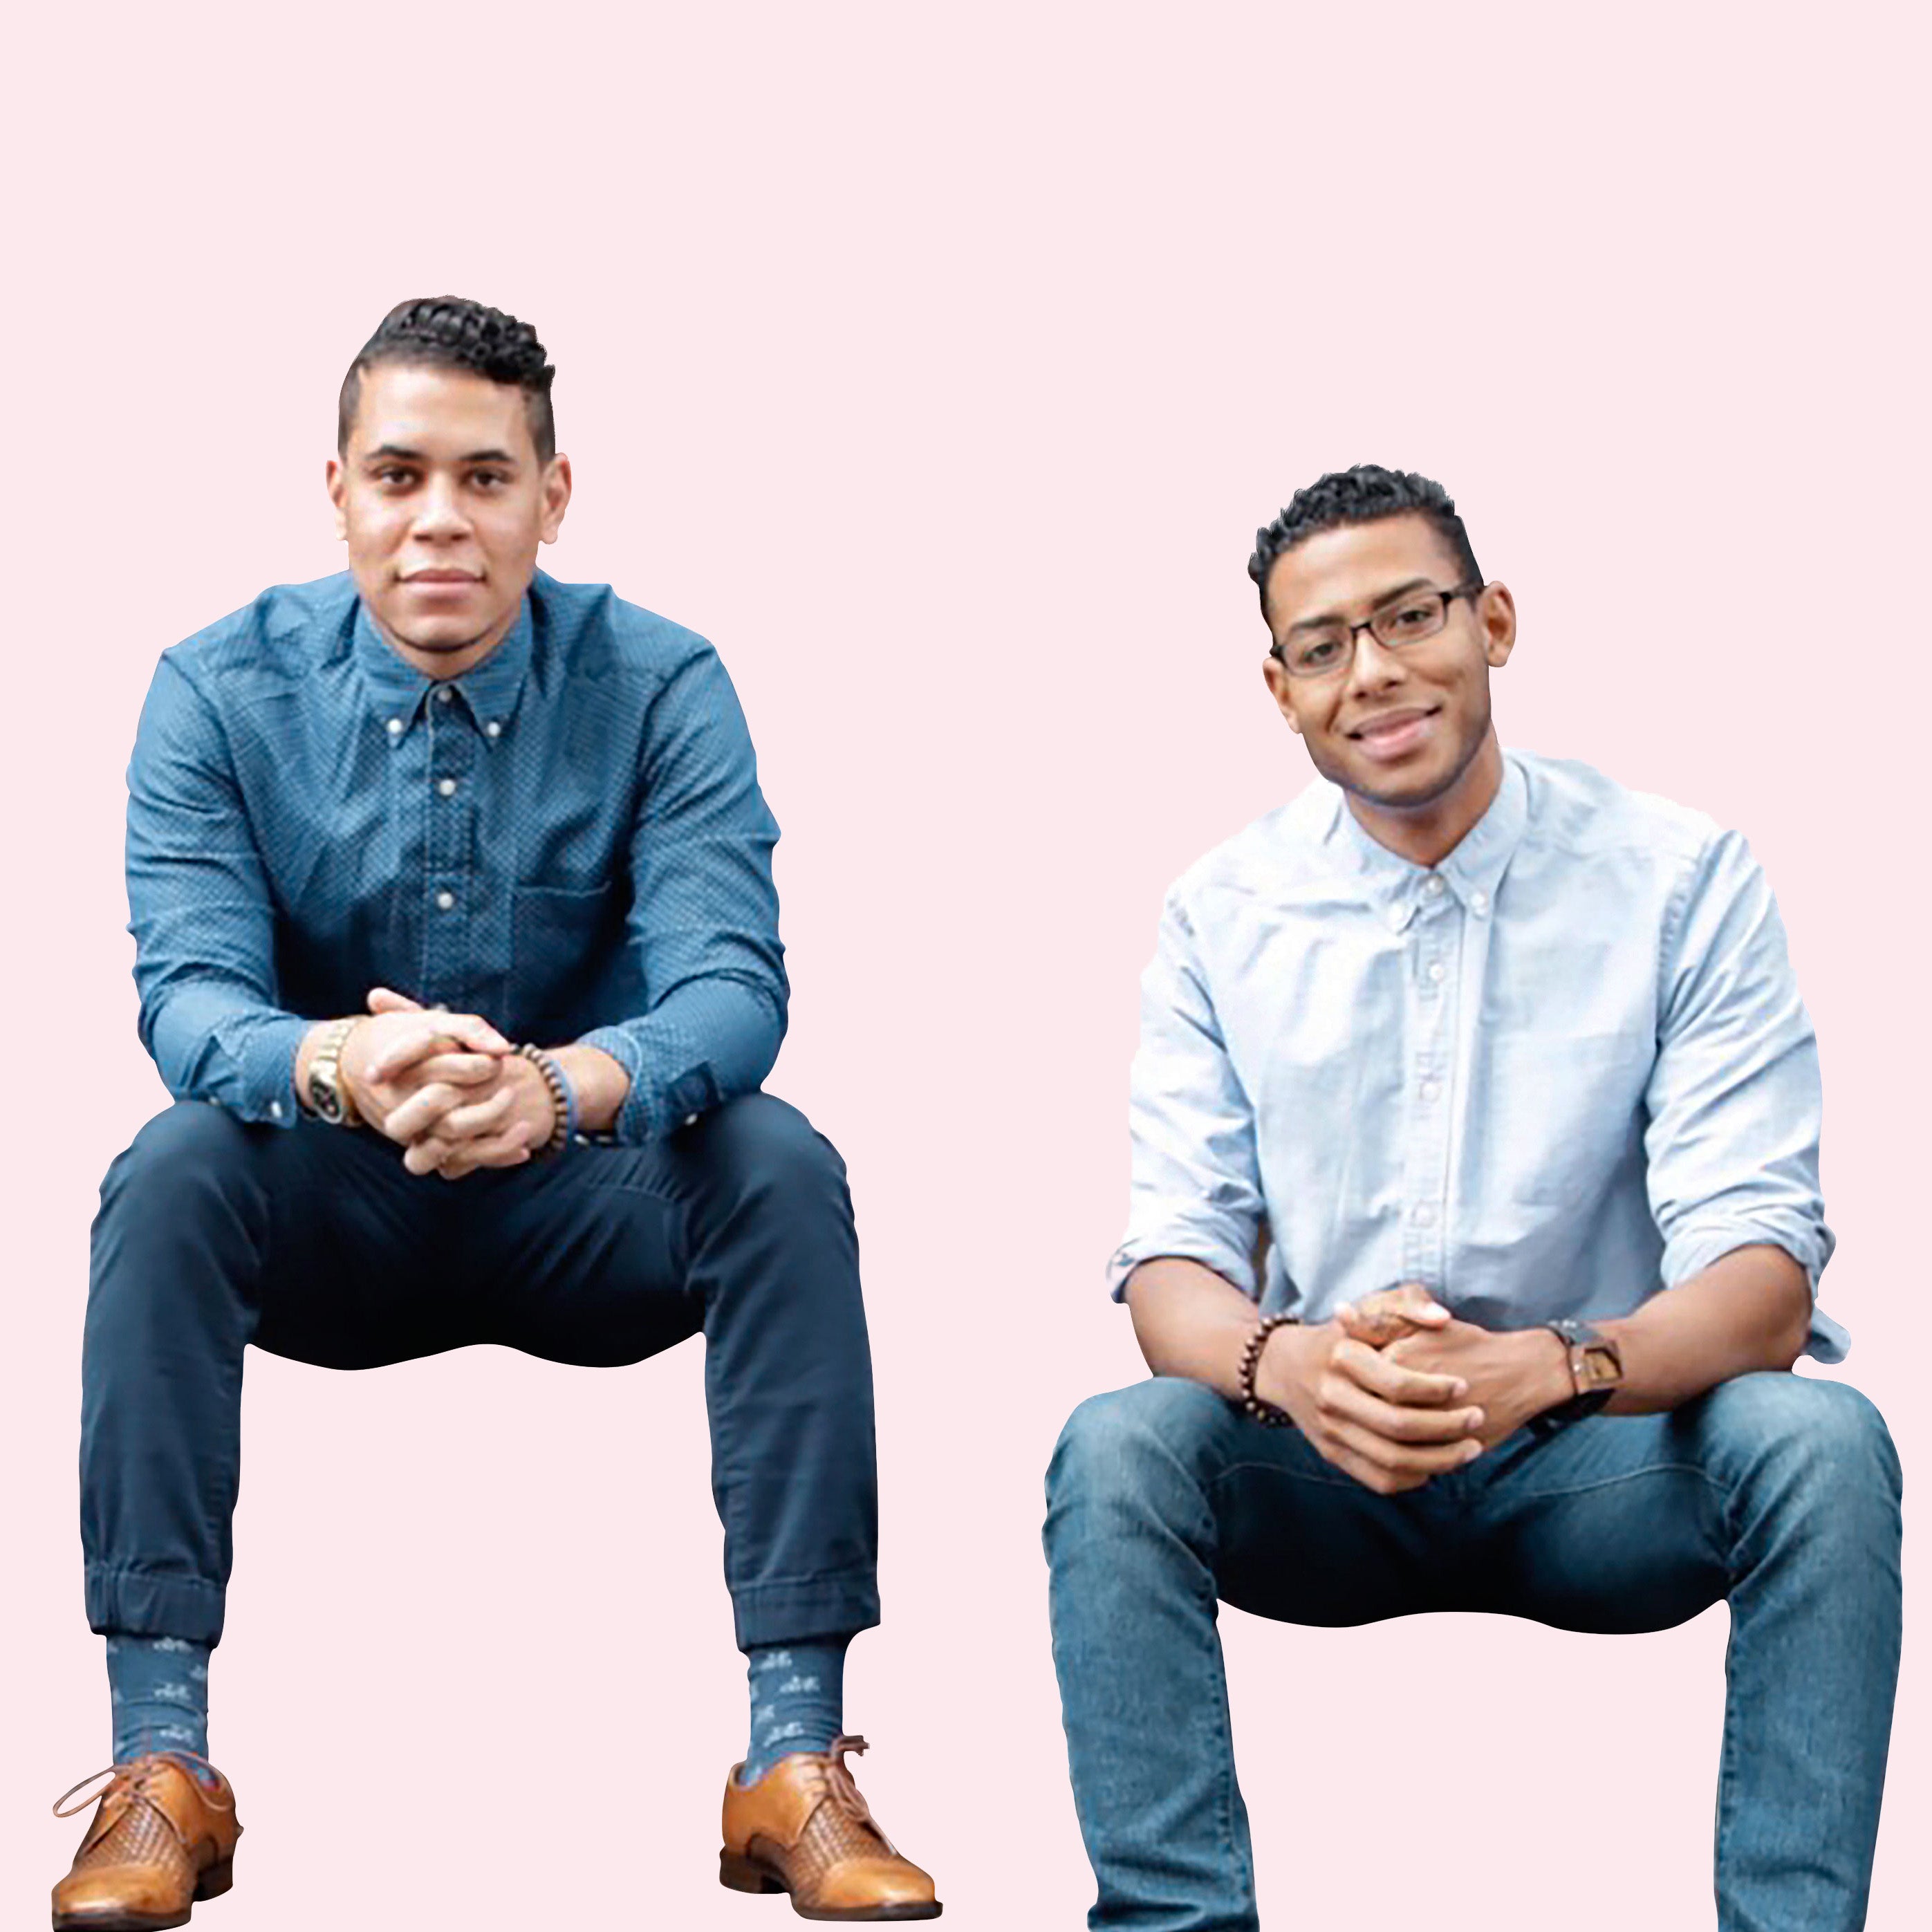 Meet The Millennial Love Leaders Committed To Promoting Healthy And Happy Relationships
